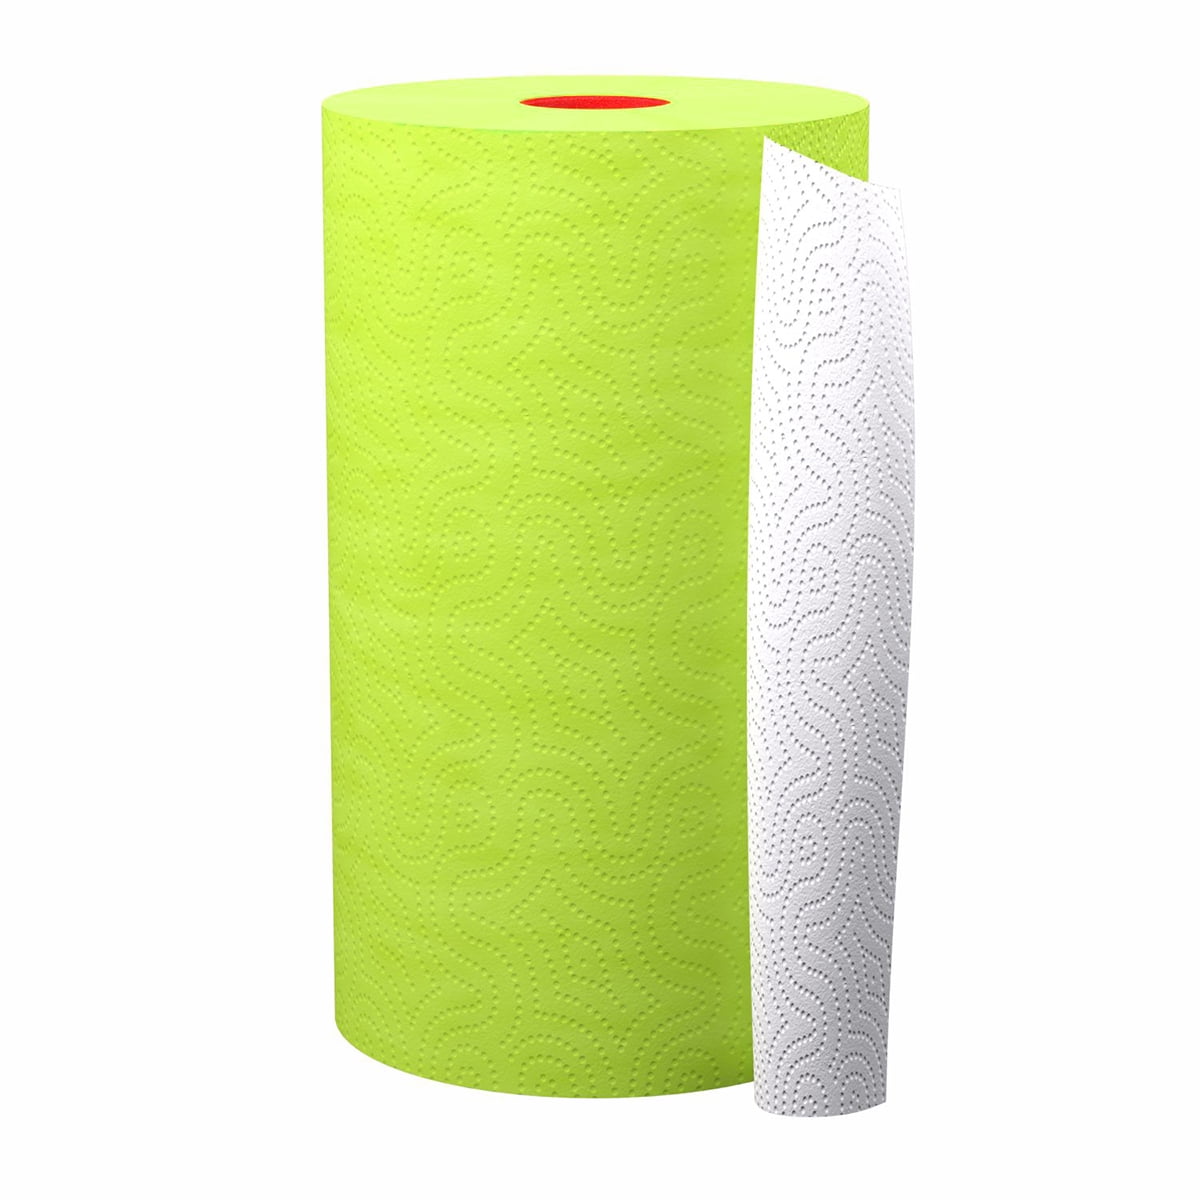 Luxury Colored Paper Towel Jumbo Roll 2Ply120 Sheets